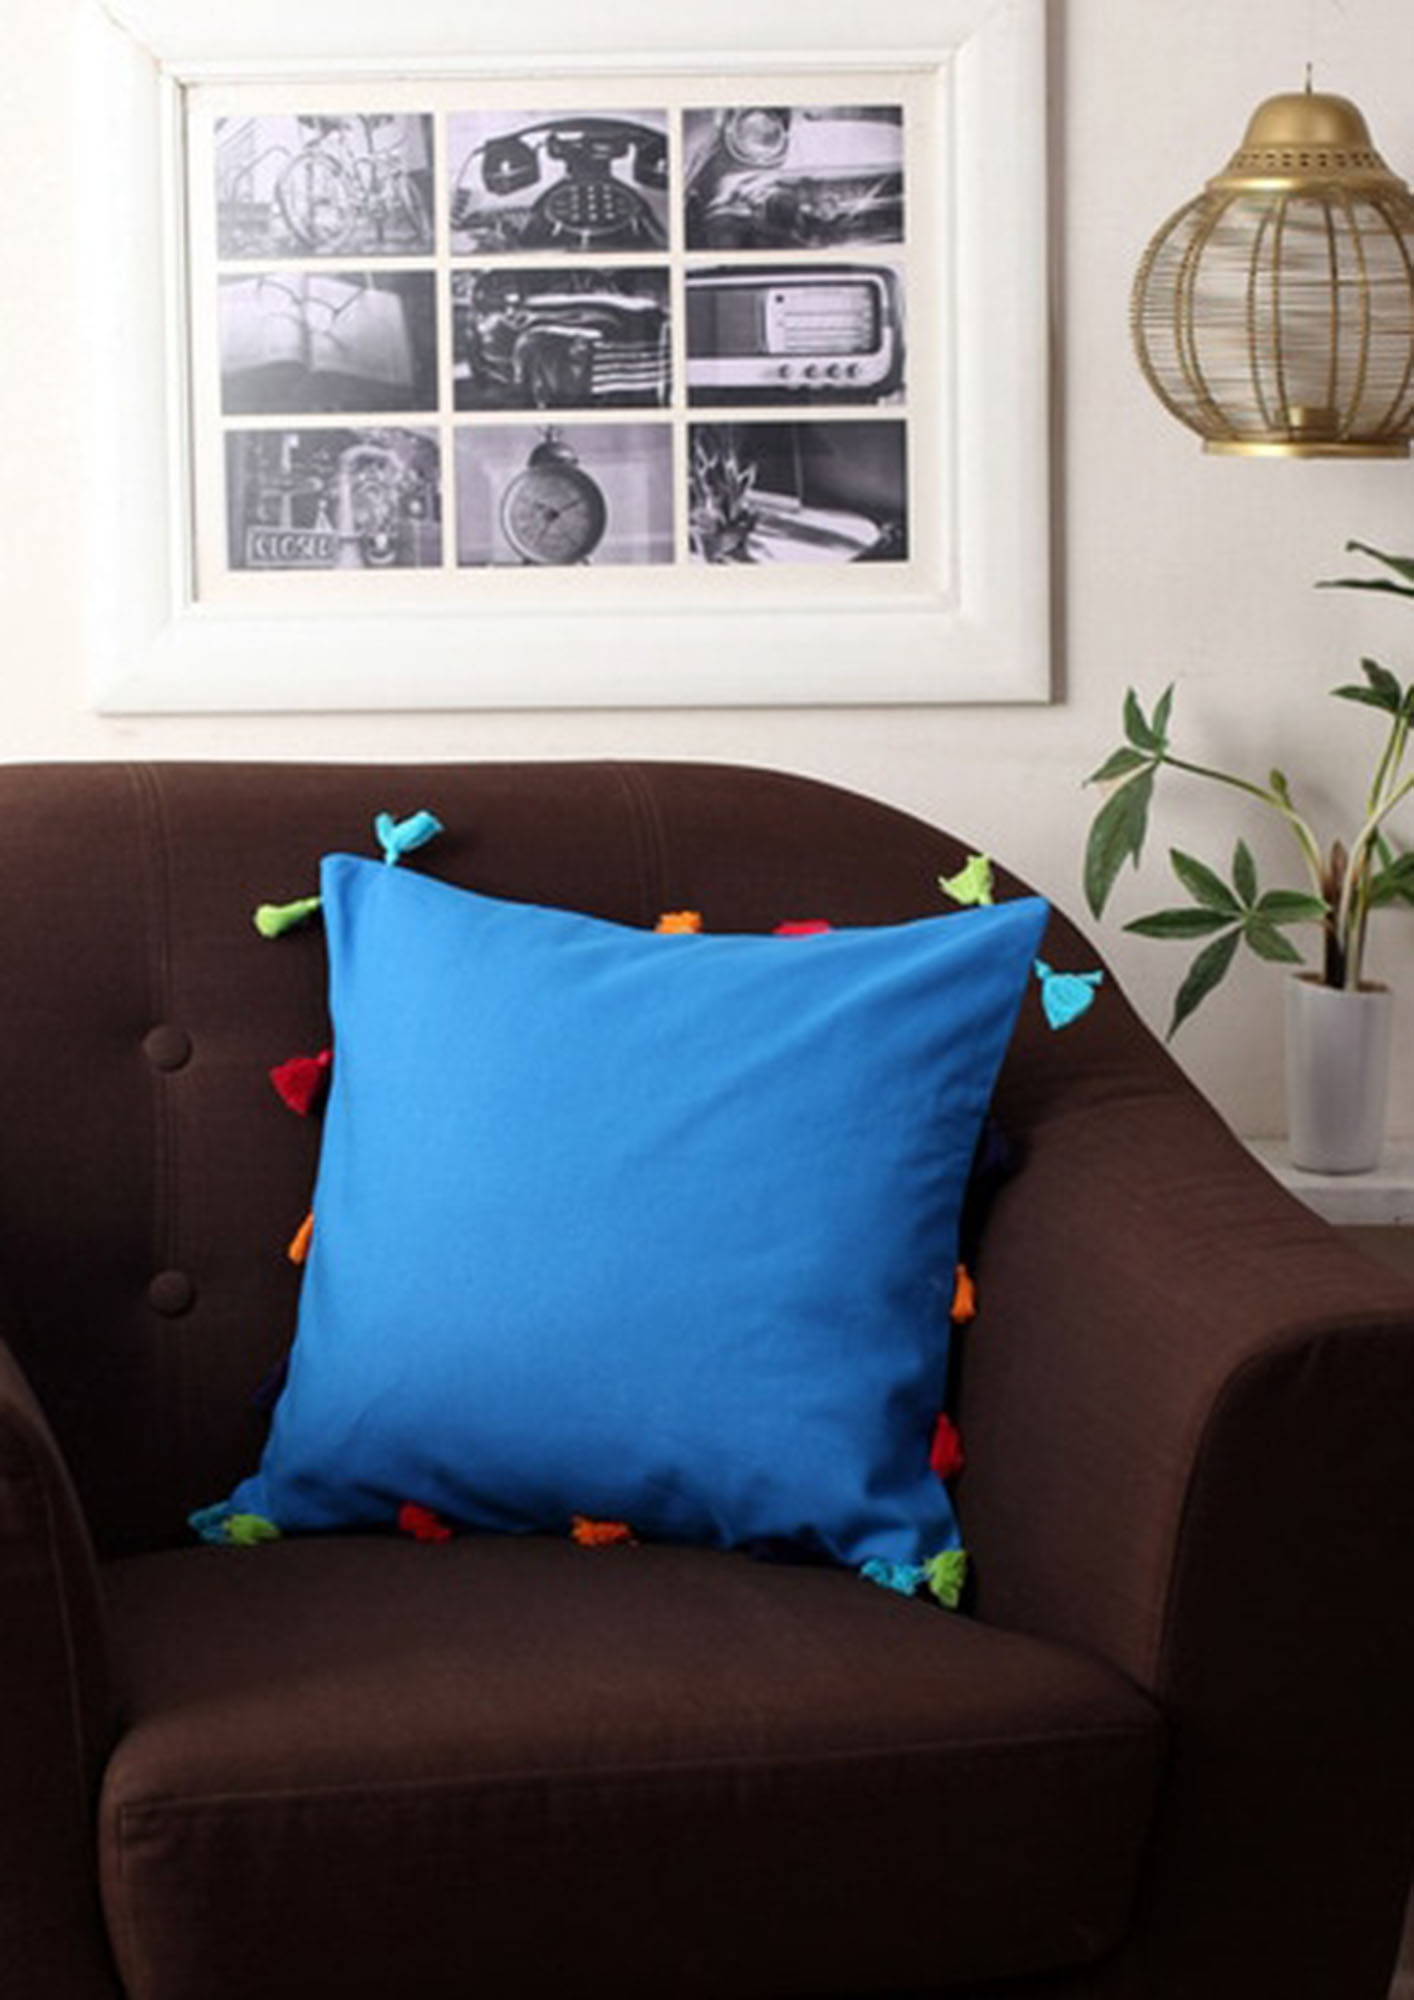 Lushomes Sky Blue Sofa Cushion Cover Online with Colorful Tassels (Single pc, 12 x 12 inches)